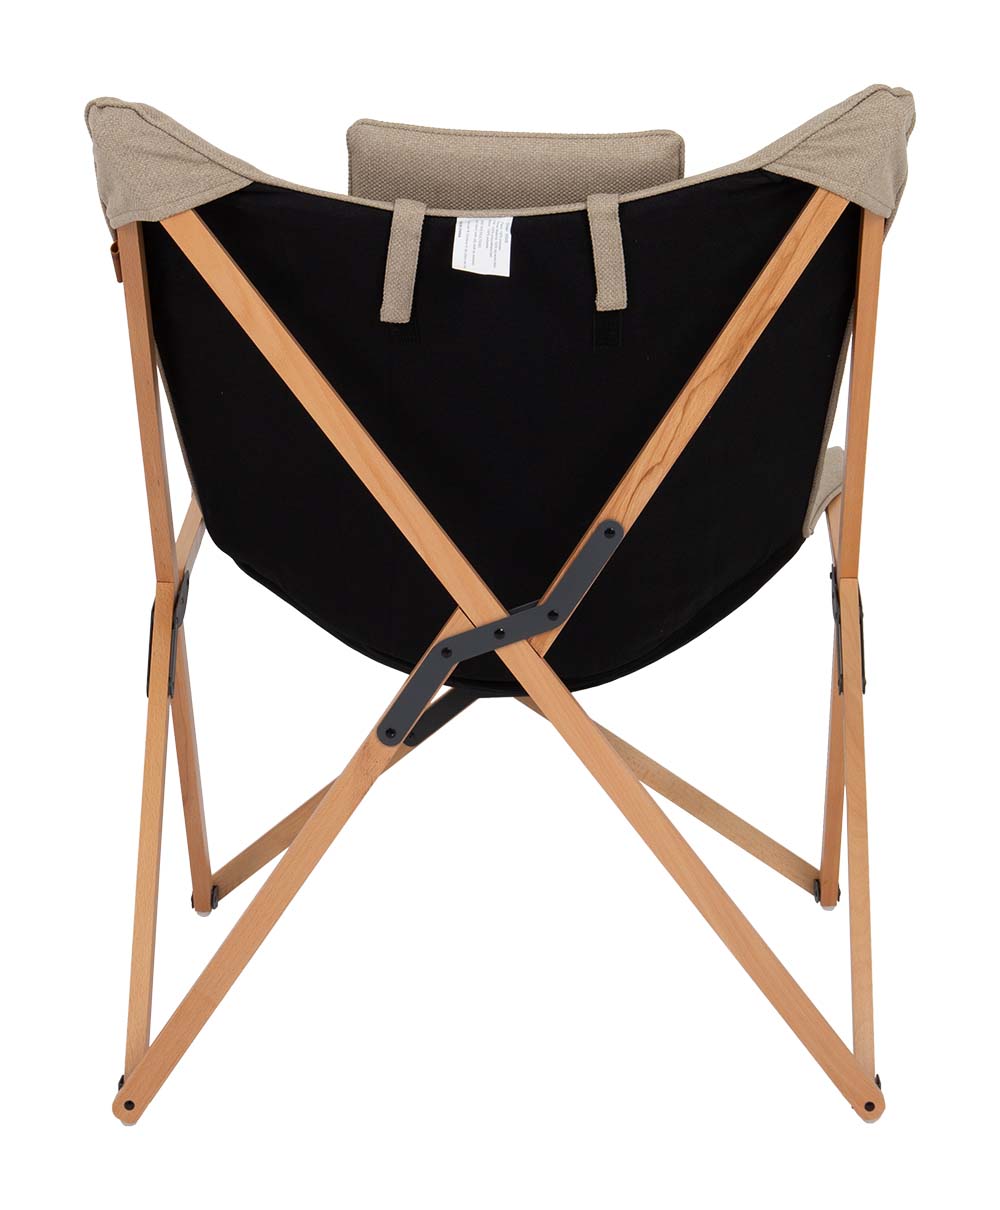 Bo-Camp - Urban Outdoor collection - Relax chair - Wembley - L - Nika - Beige detail 6